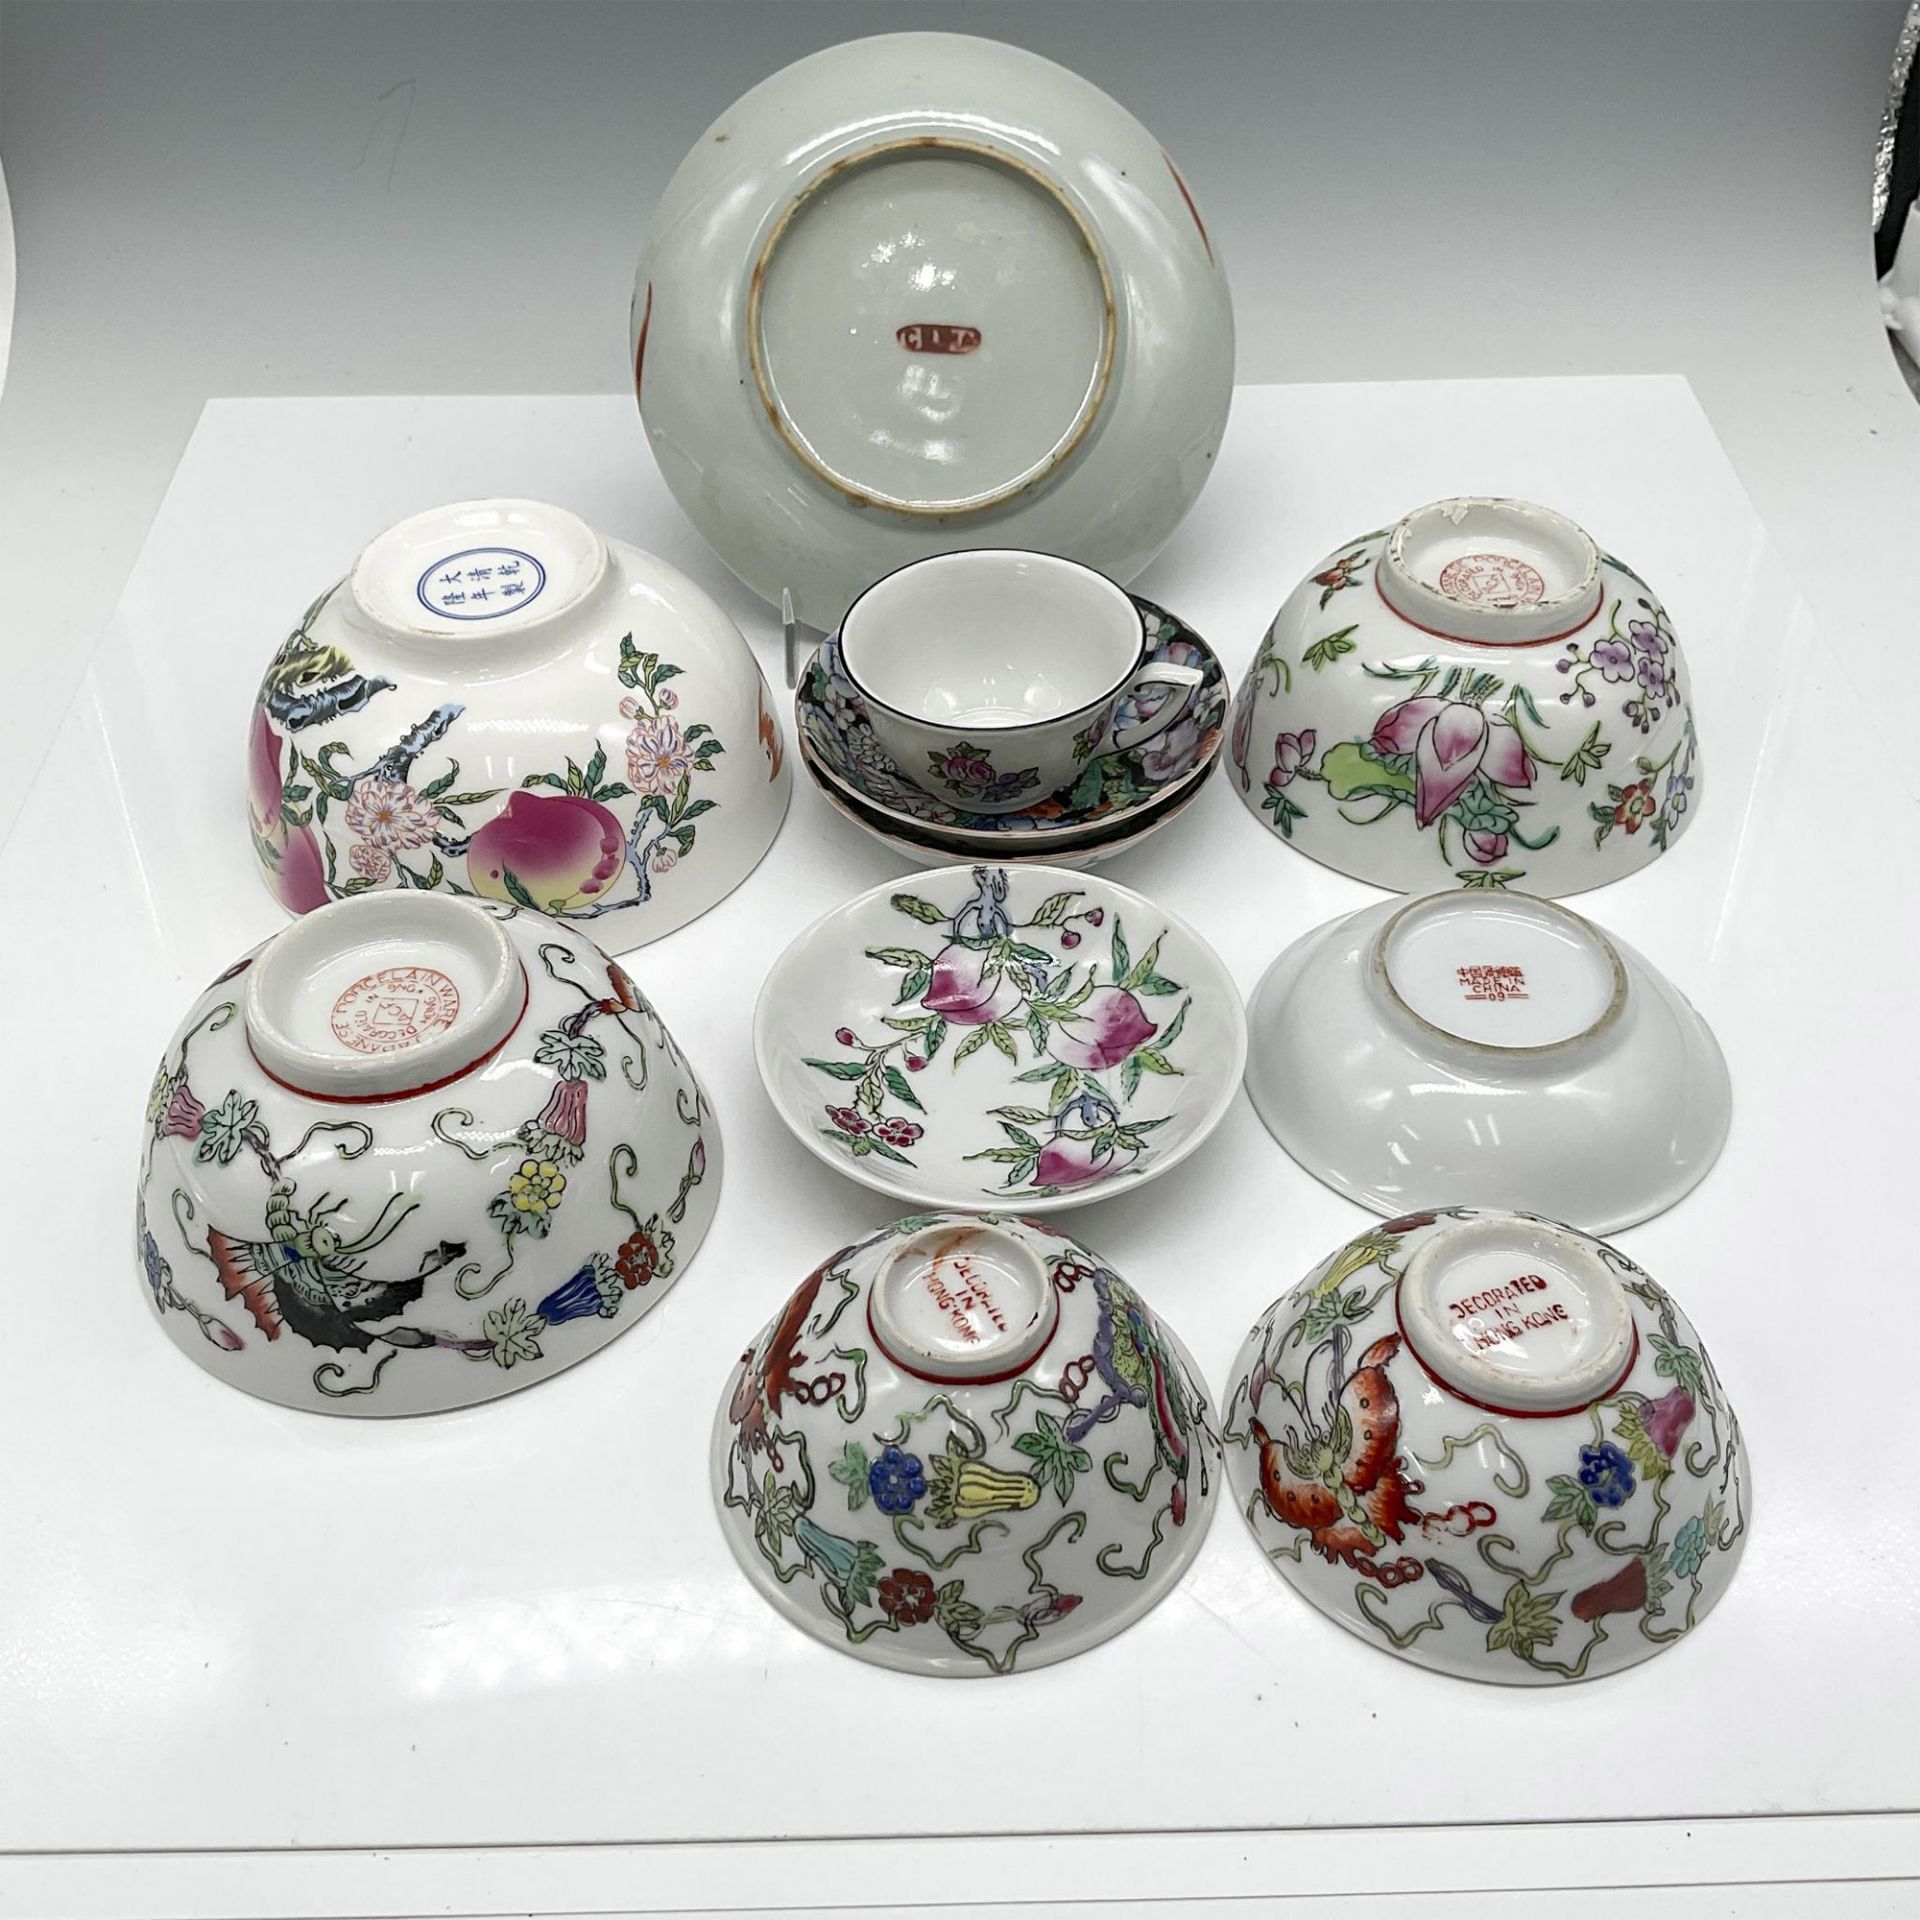 11pc Mixed Chinese Porcelain Dishes - Image 2 of 2